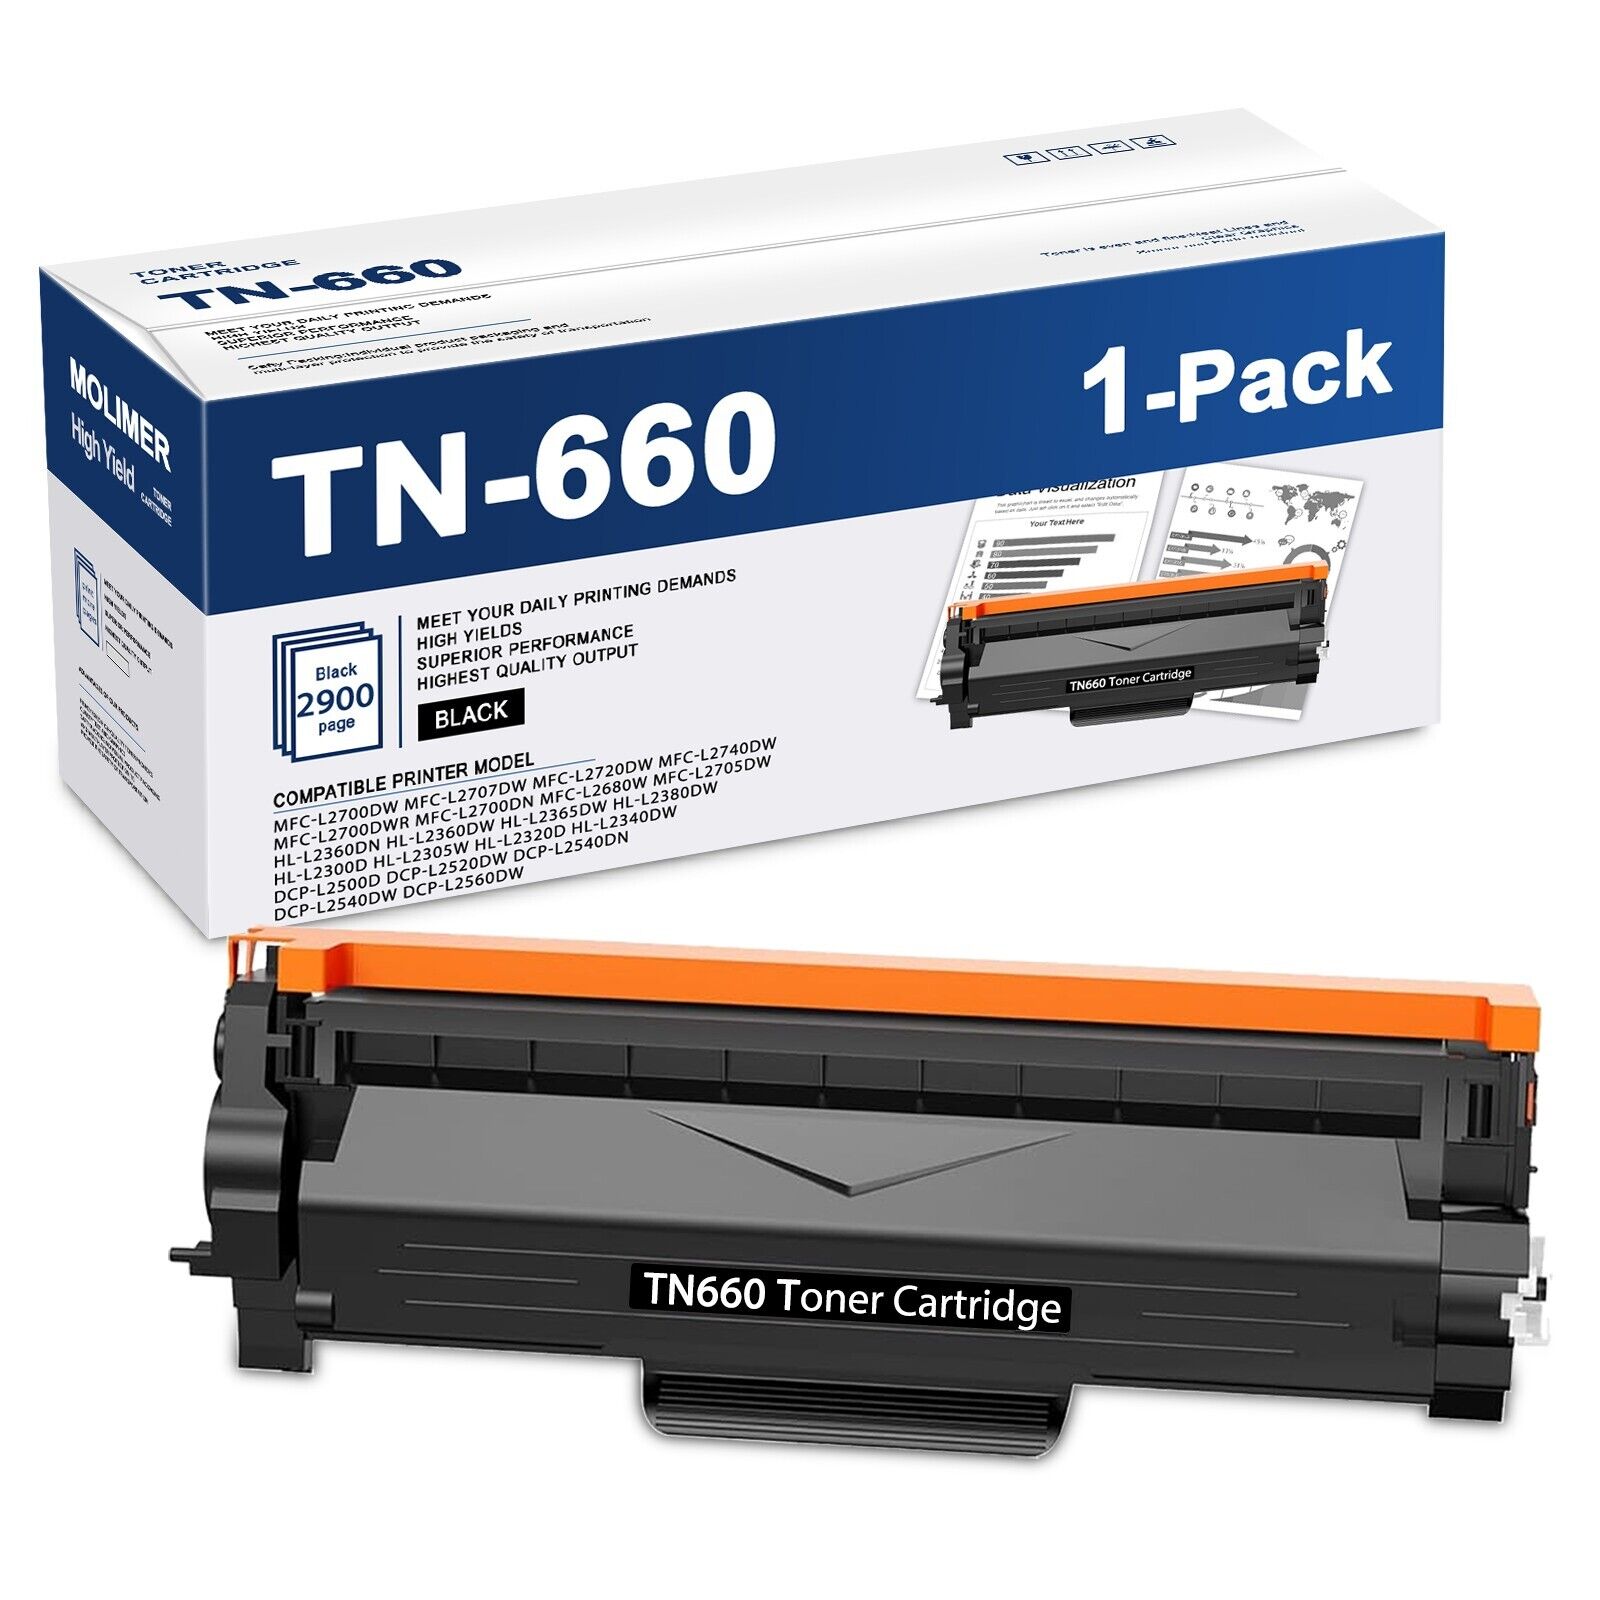 TN660 High Yield Toner Cartridge Replacement for Brother MFC-L2700DW Printer 1BK